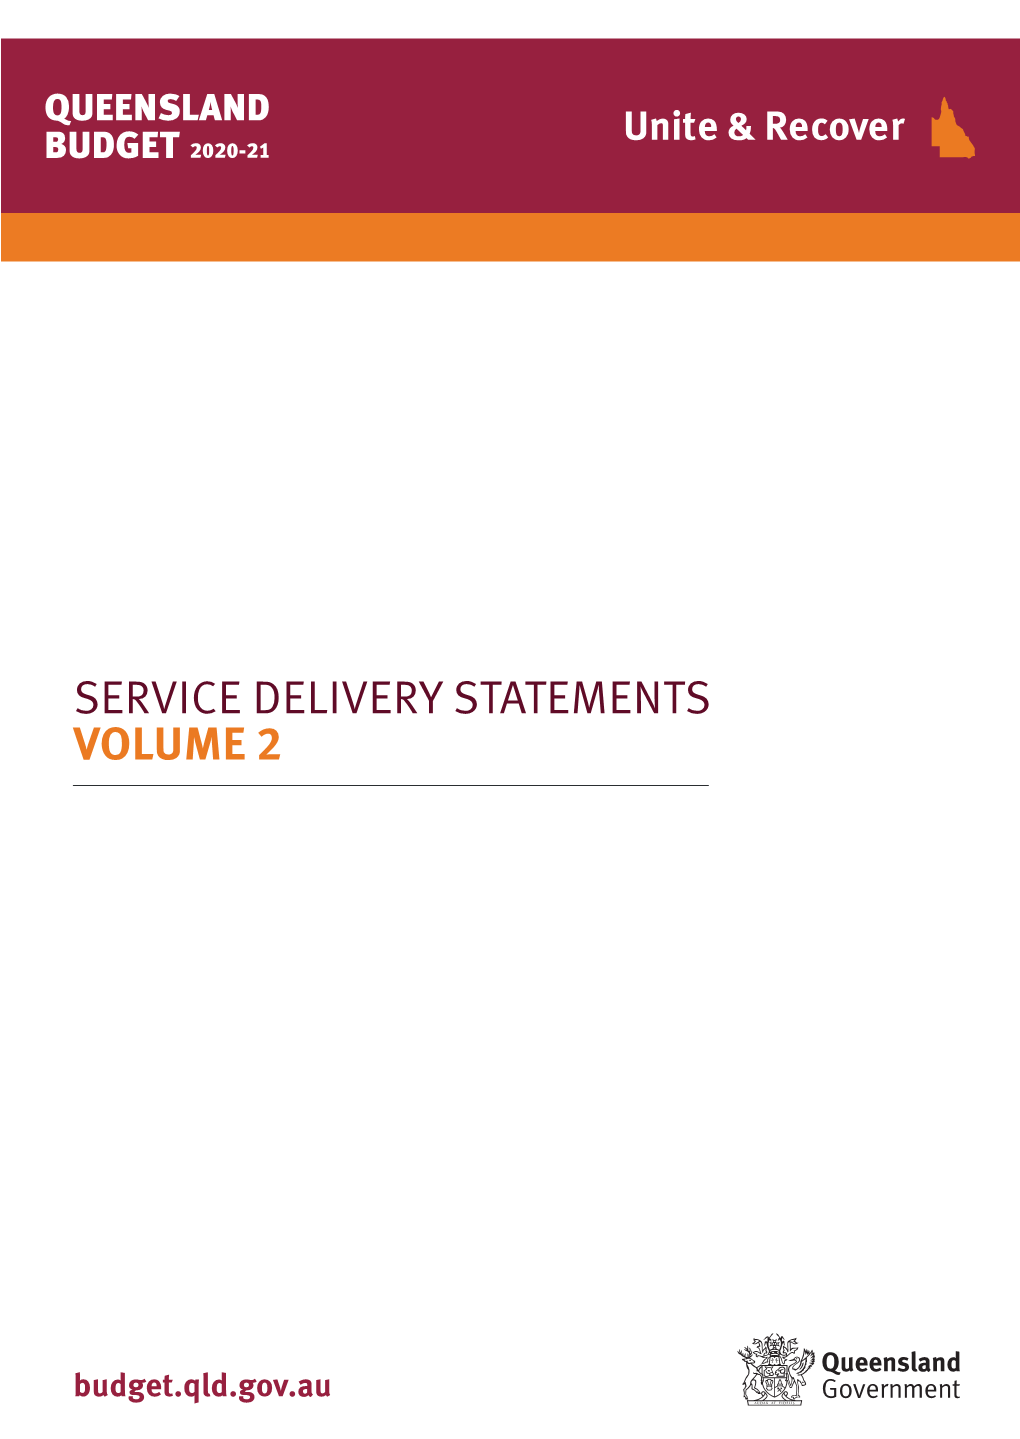 Service Delivery Statements Volume 2